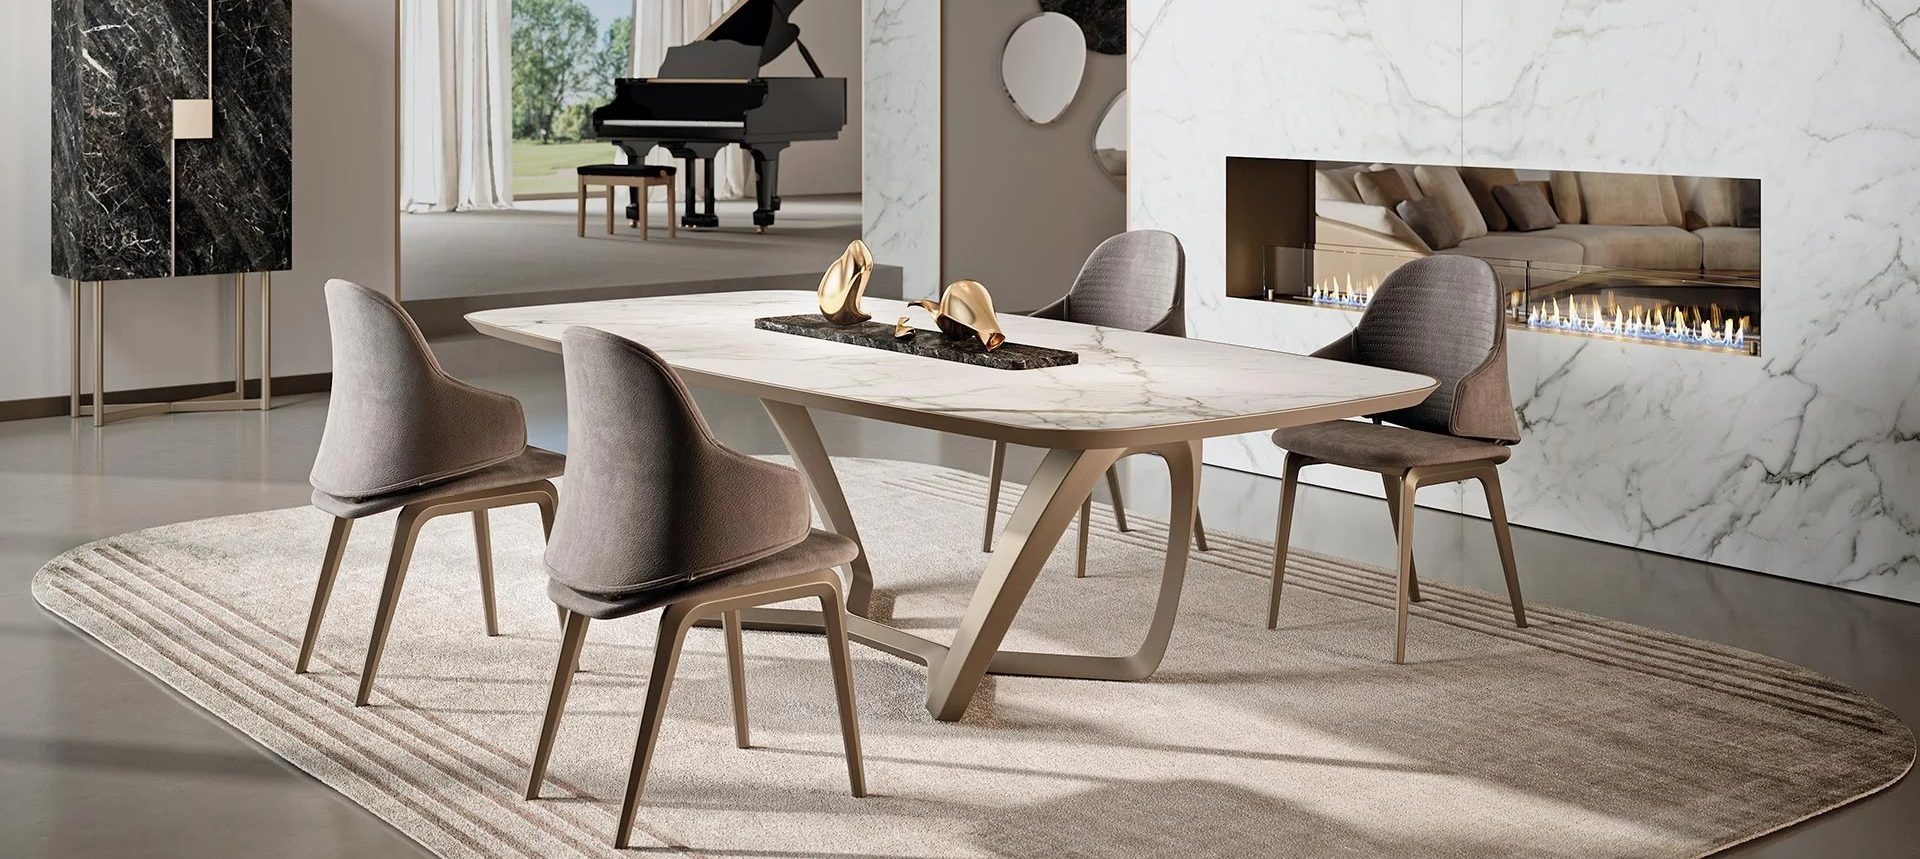 Segno Dining Table